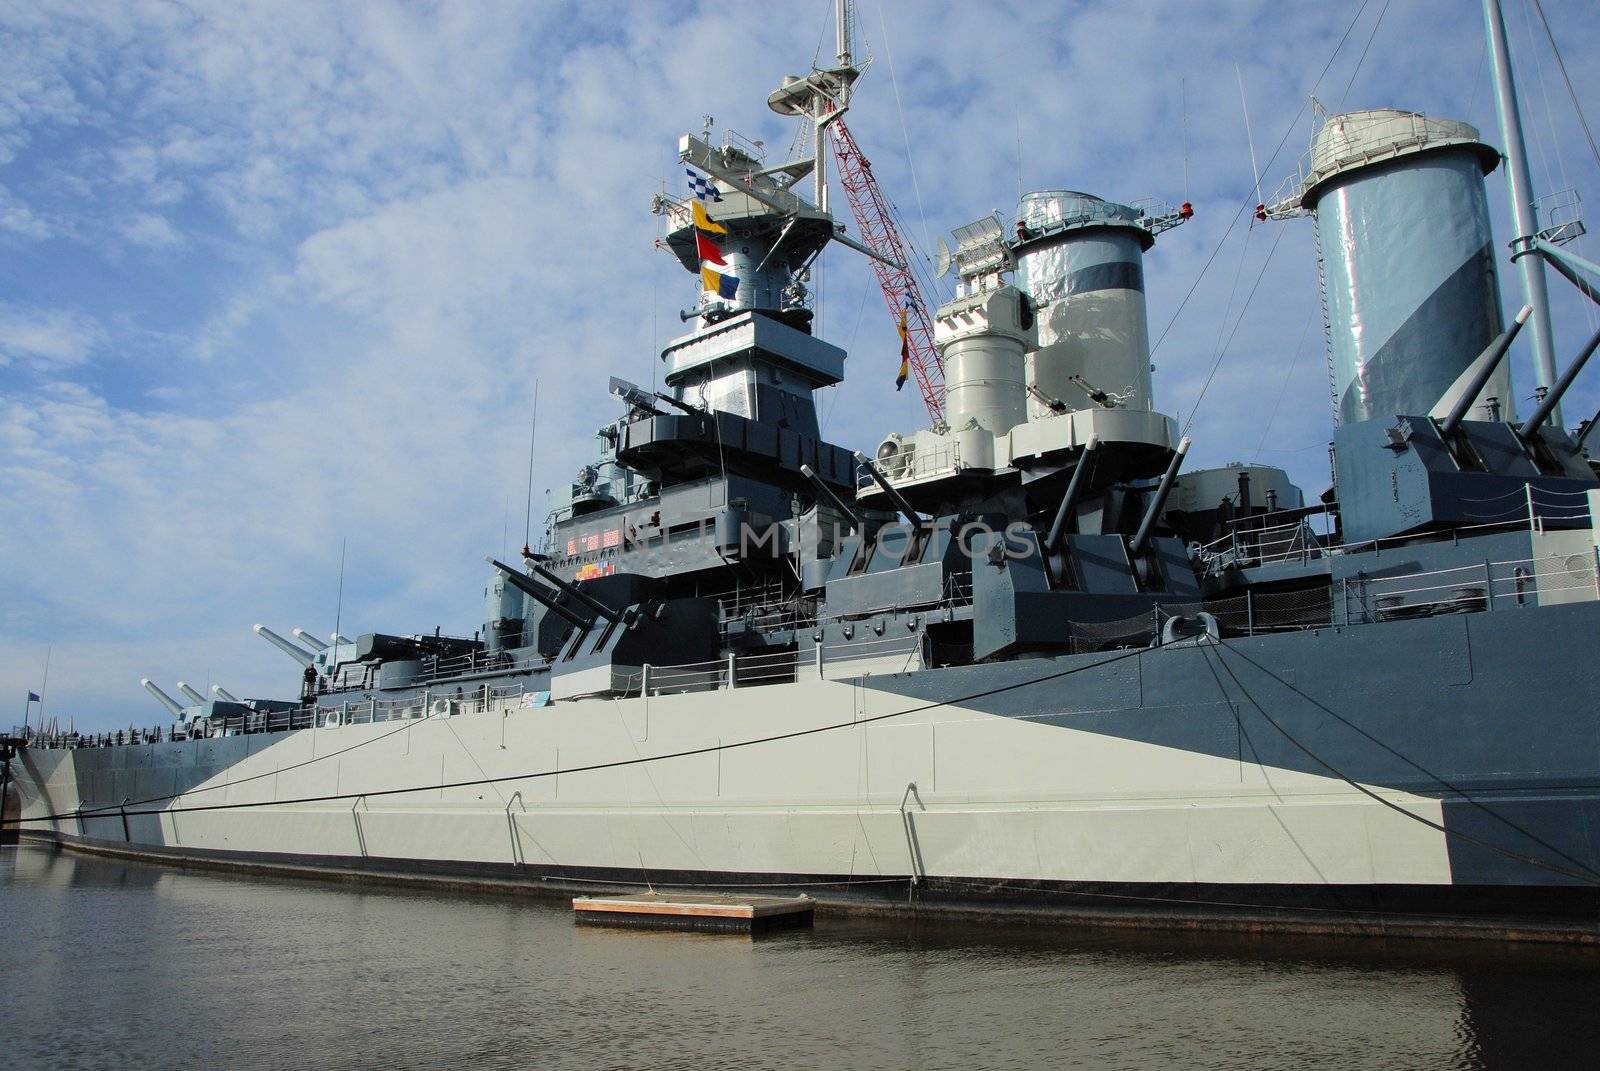 An old world war two battleship converted to a museum.